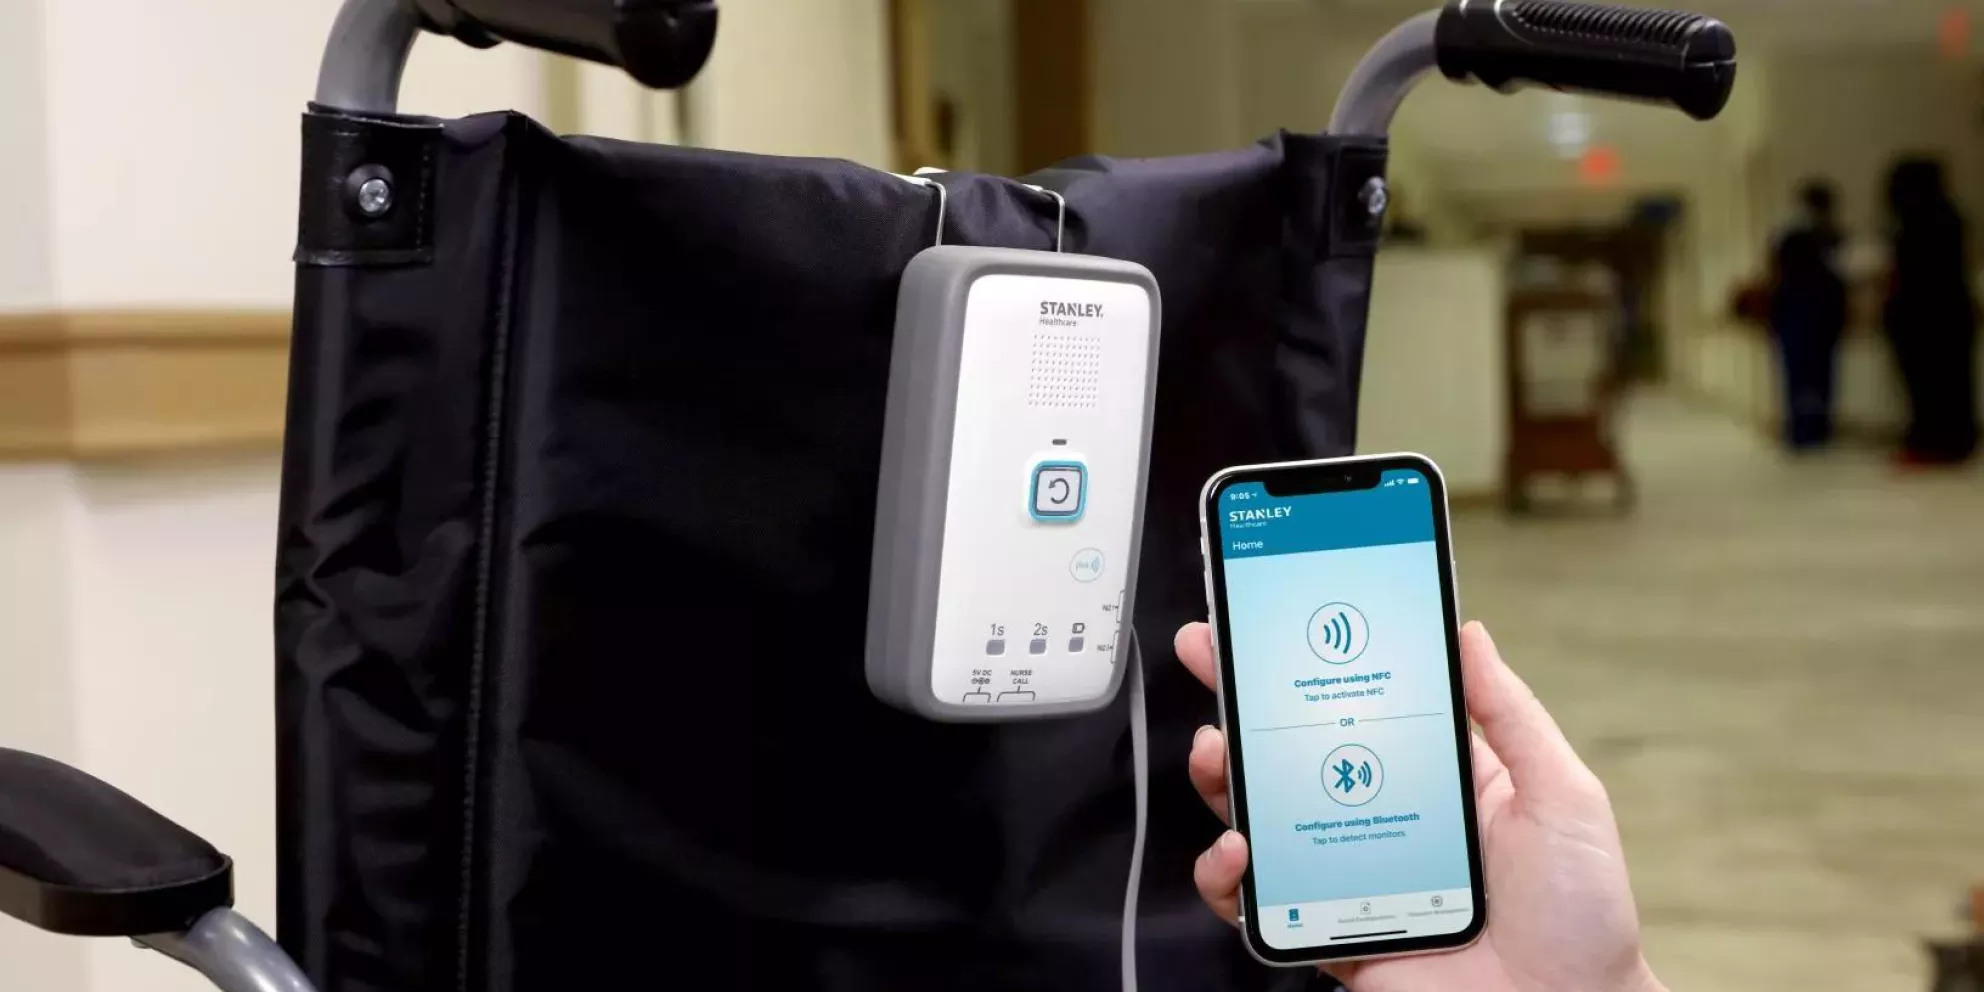 Caregiver holding up an iPhone showing the iOS Mobile Application for the M210 Fall Monitoring System, while the fall monitor is clipped to the back of a wheelchair.